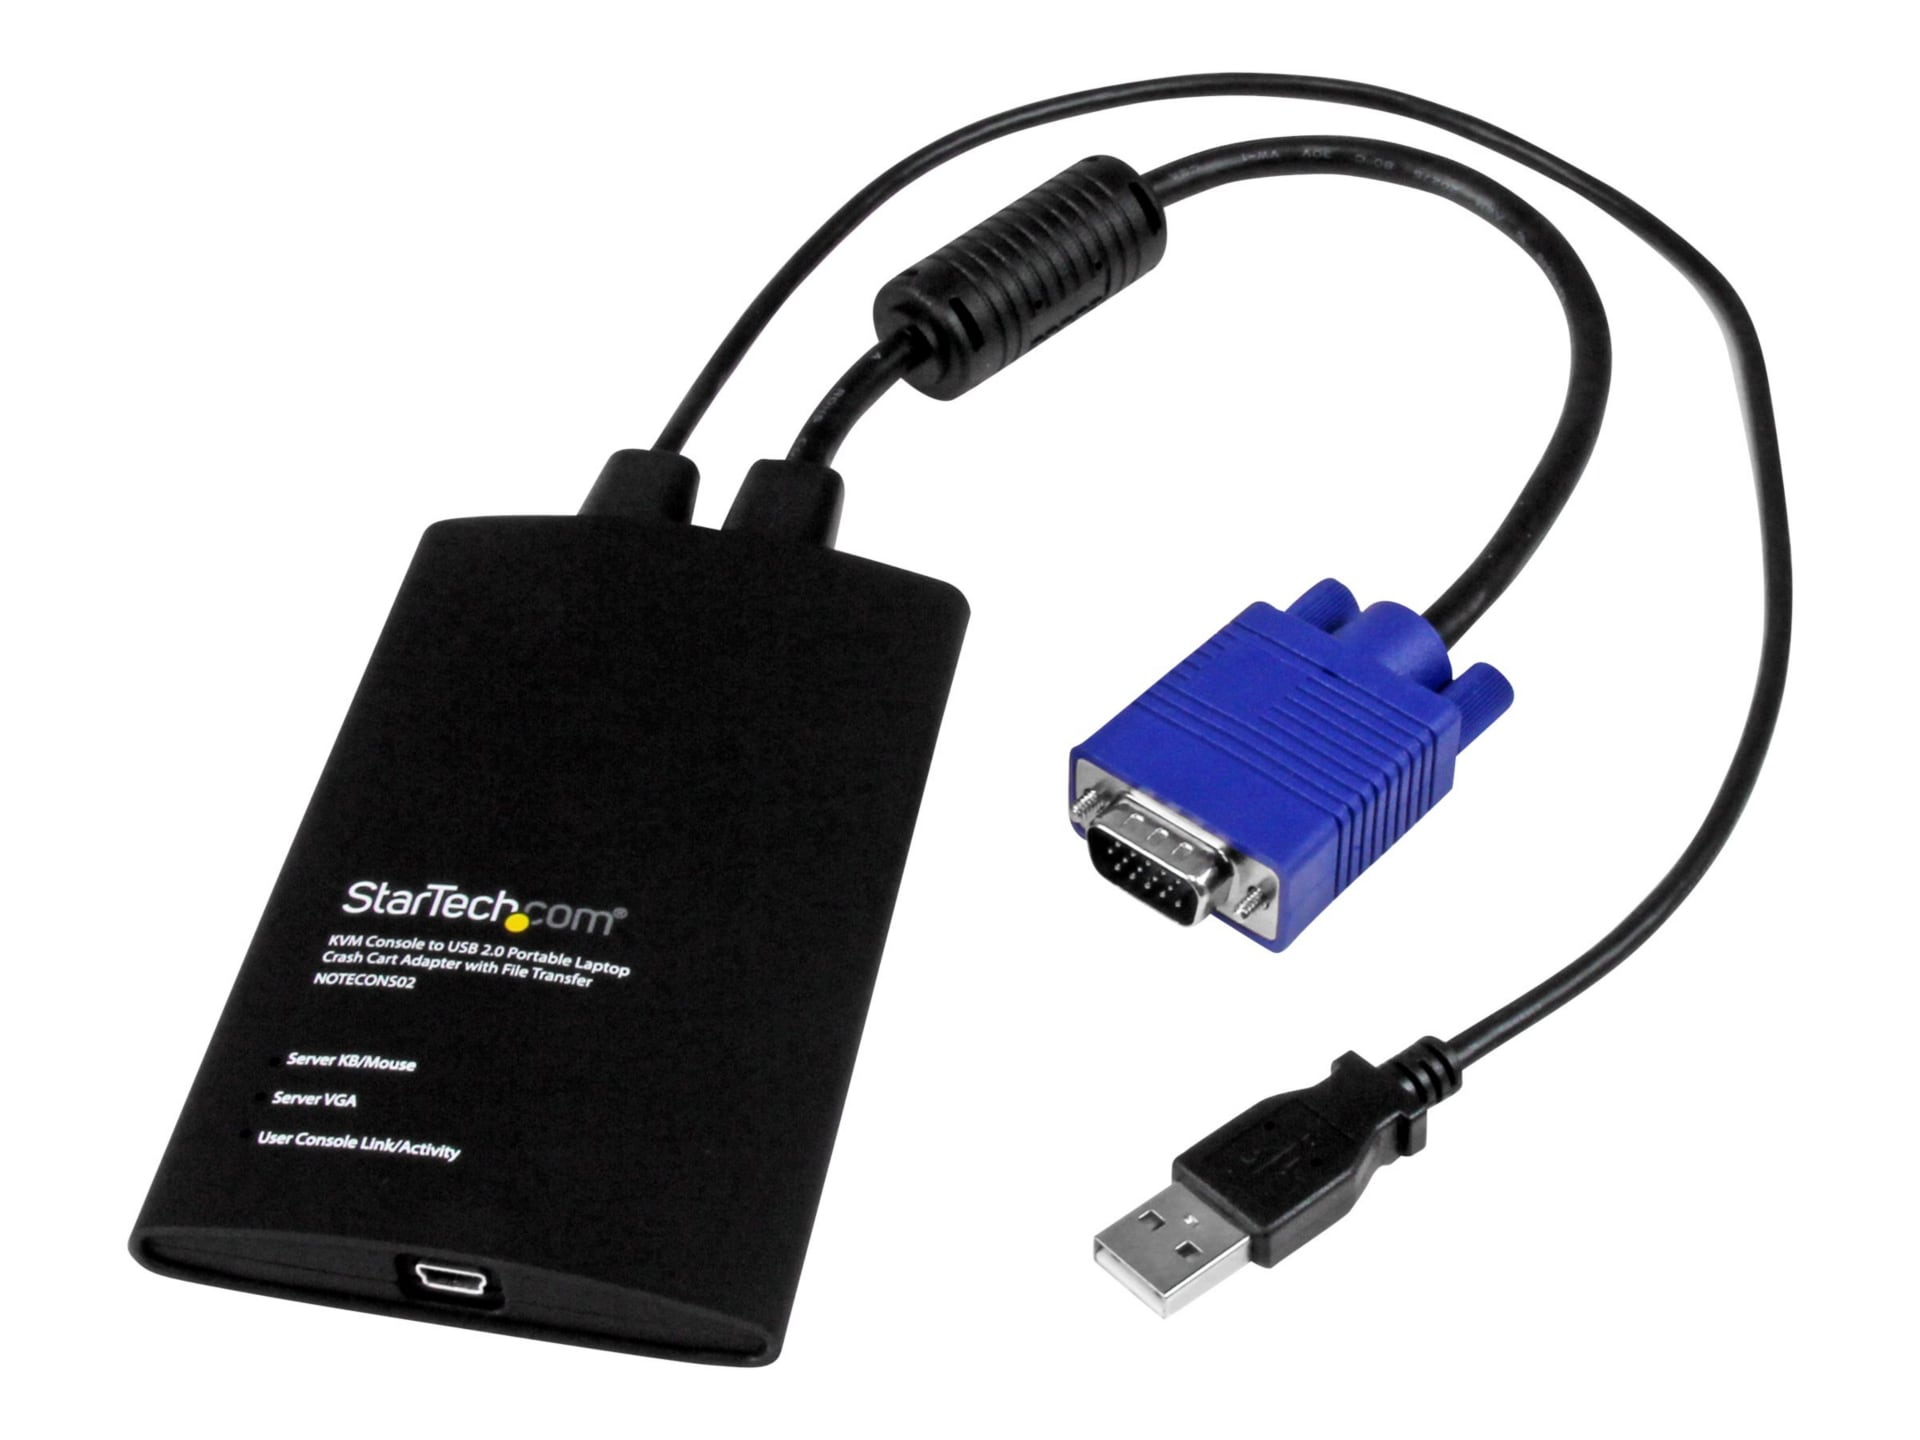 StarTech.com USB Crash Cart Adapter with File Transfer and Video Capture